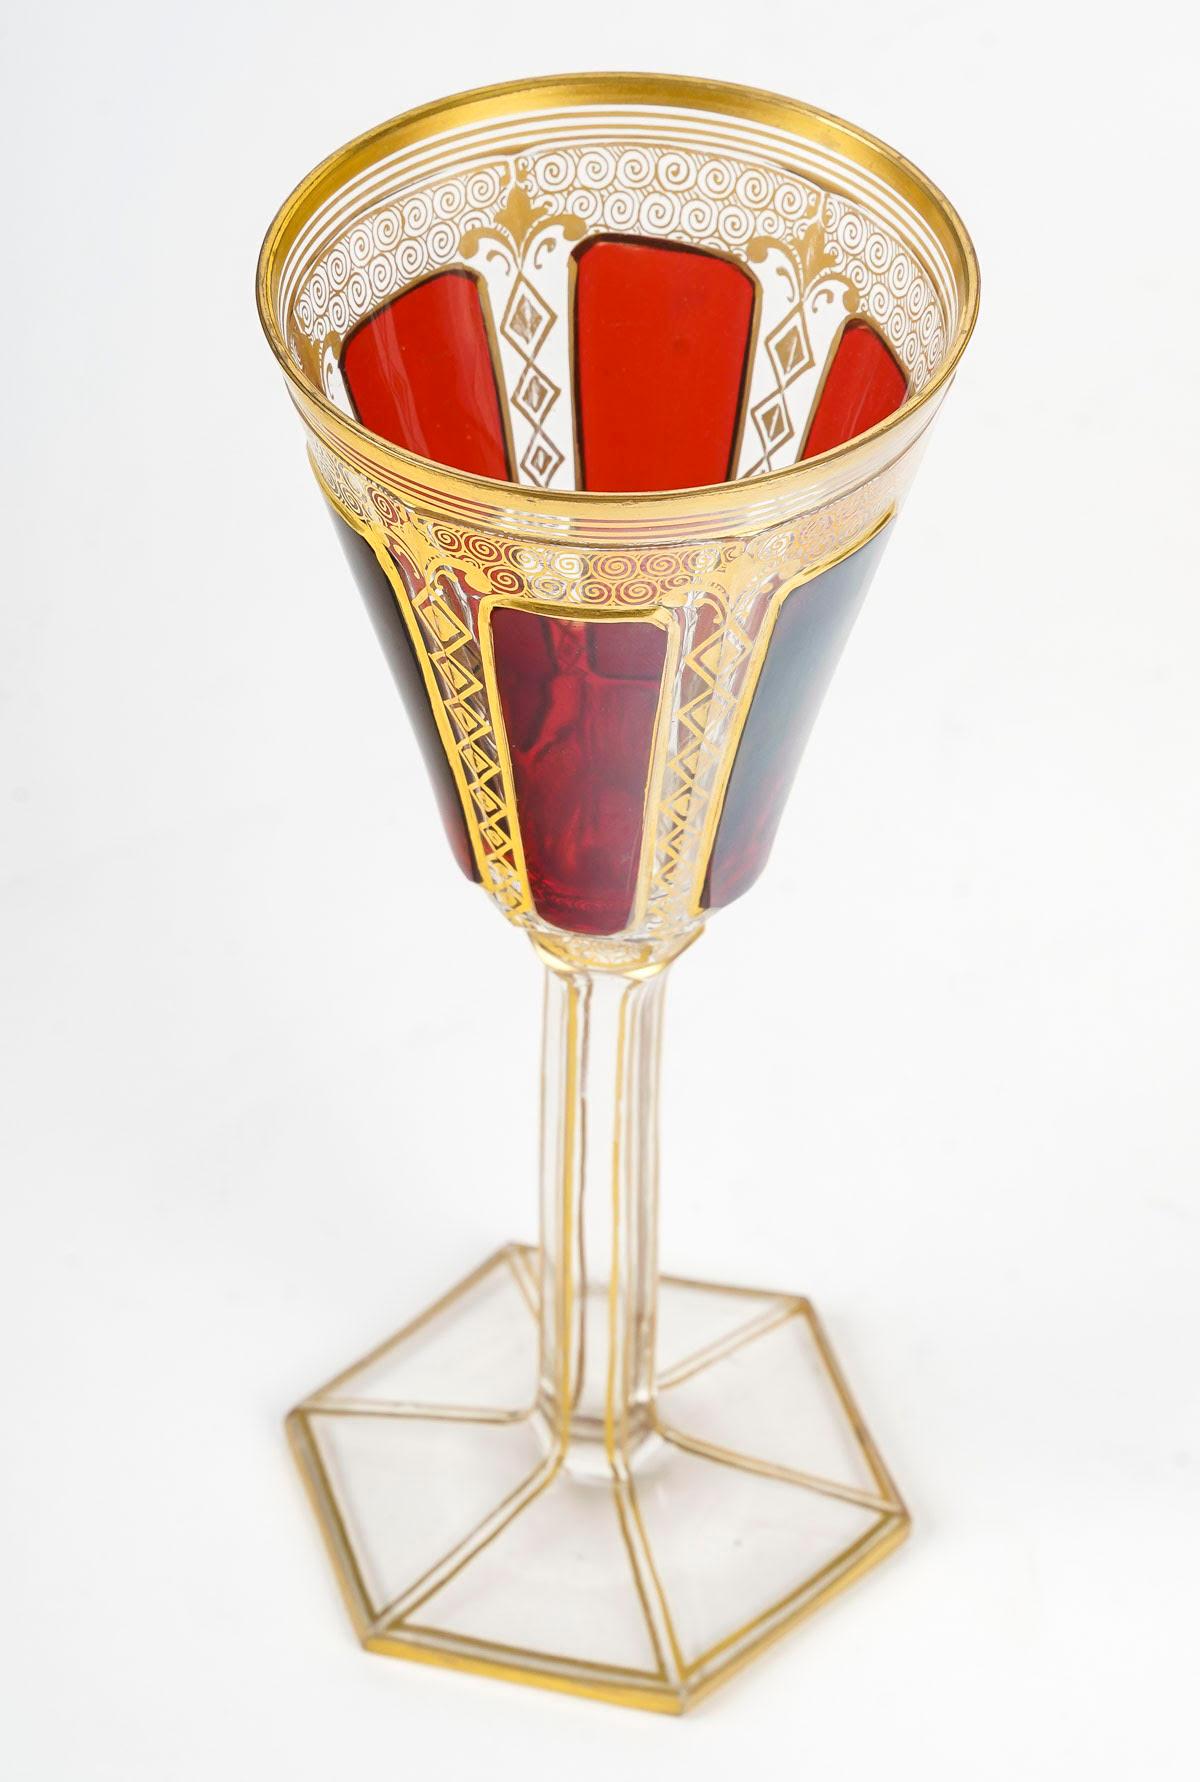 5 Bohemian Crystal Glasses, Red Cabochon, 19th Century, Napoleon III Period. In Good Condition For Sale In Saint-Ouen, FR